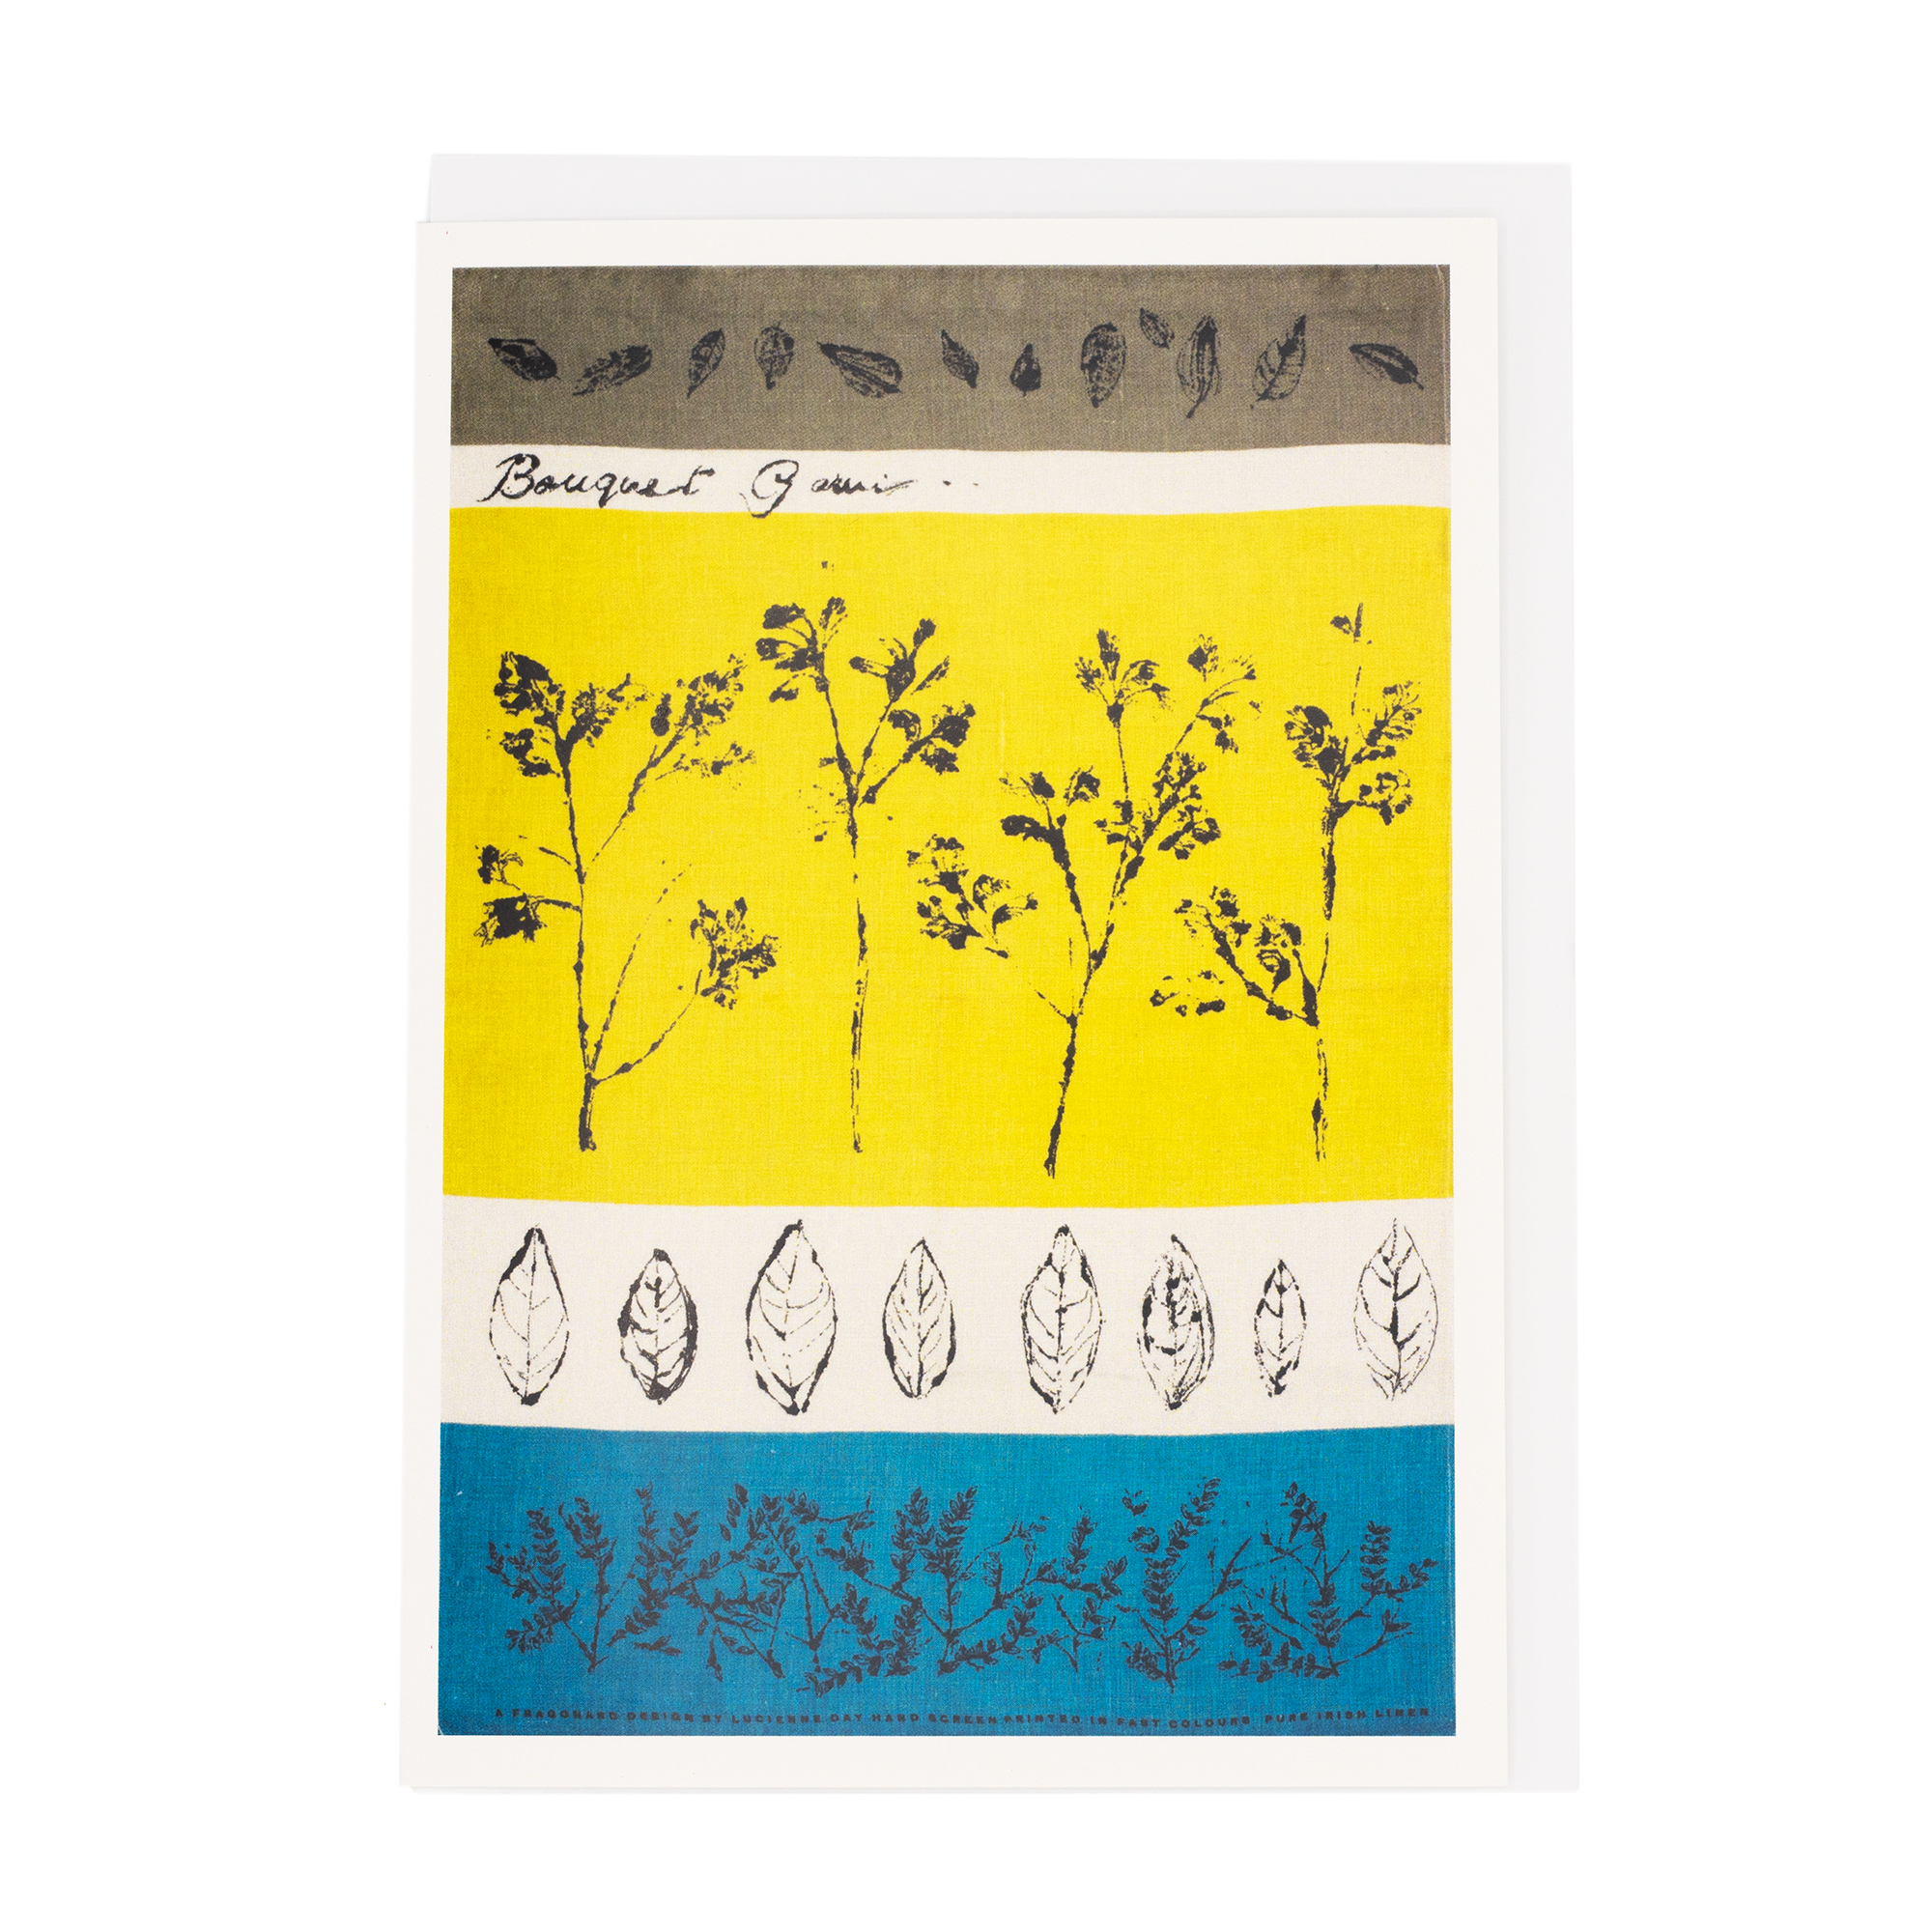 Image of greetings card with Lucienne Day Bouquet Garni design. Yellow, blue and white botanical pattern.